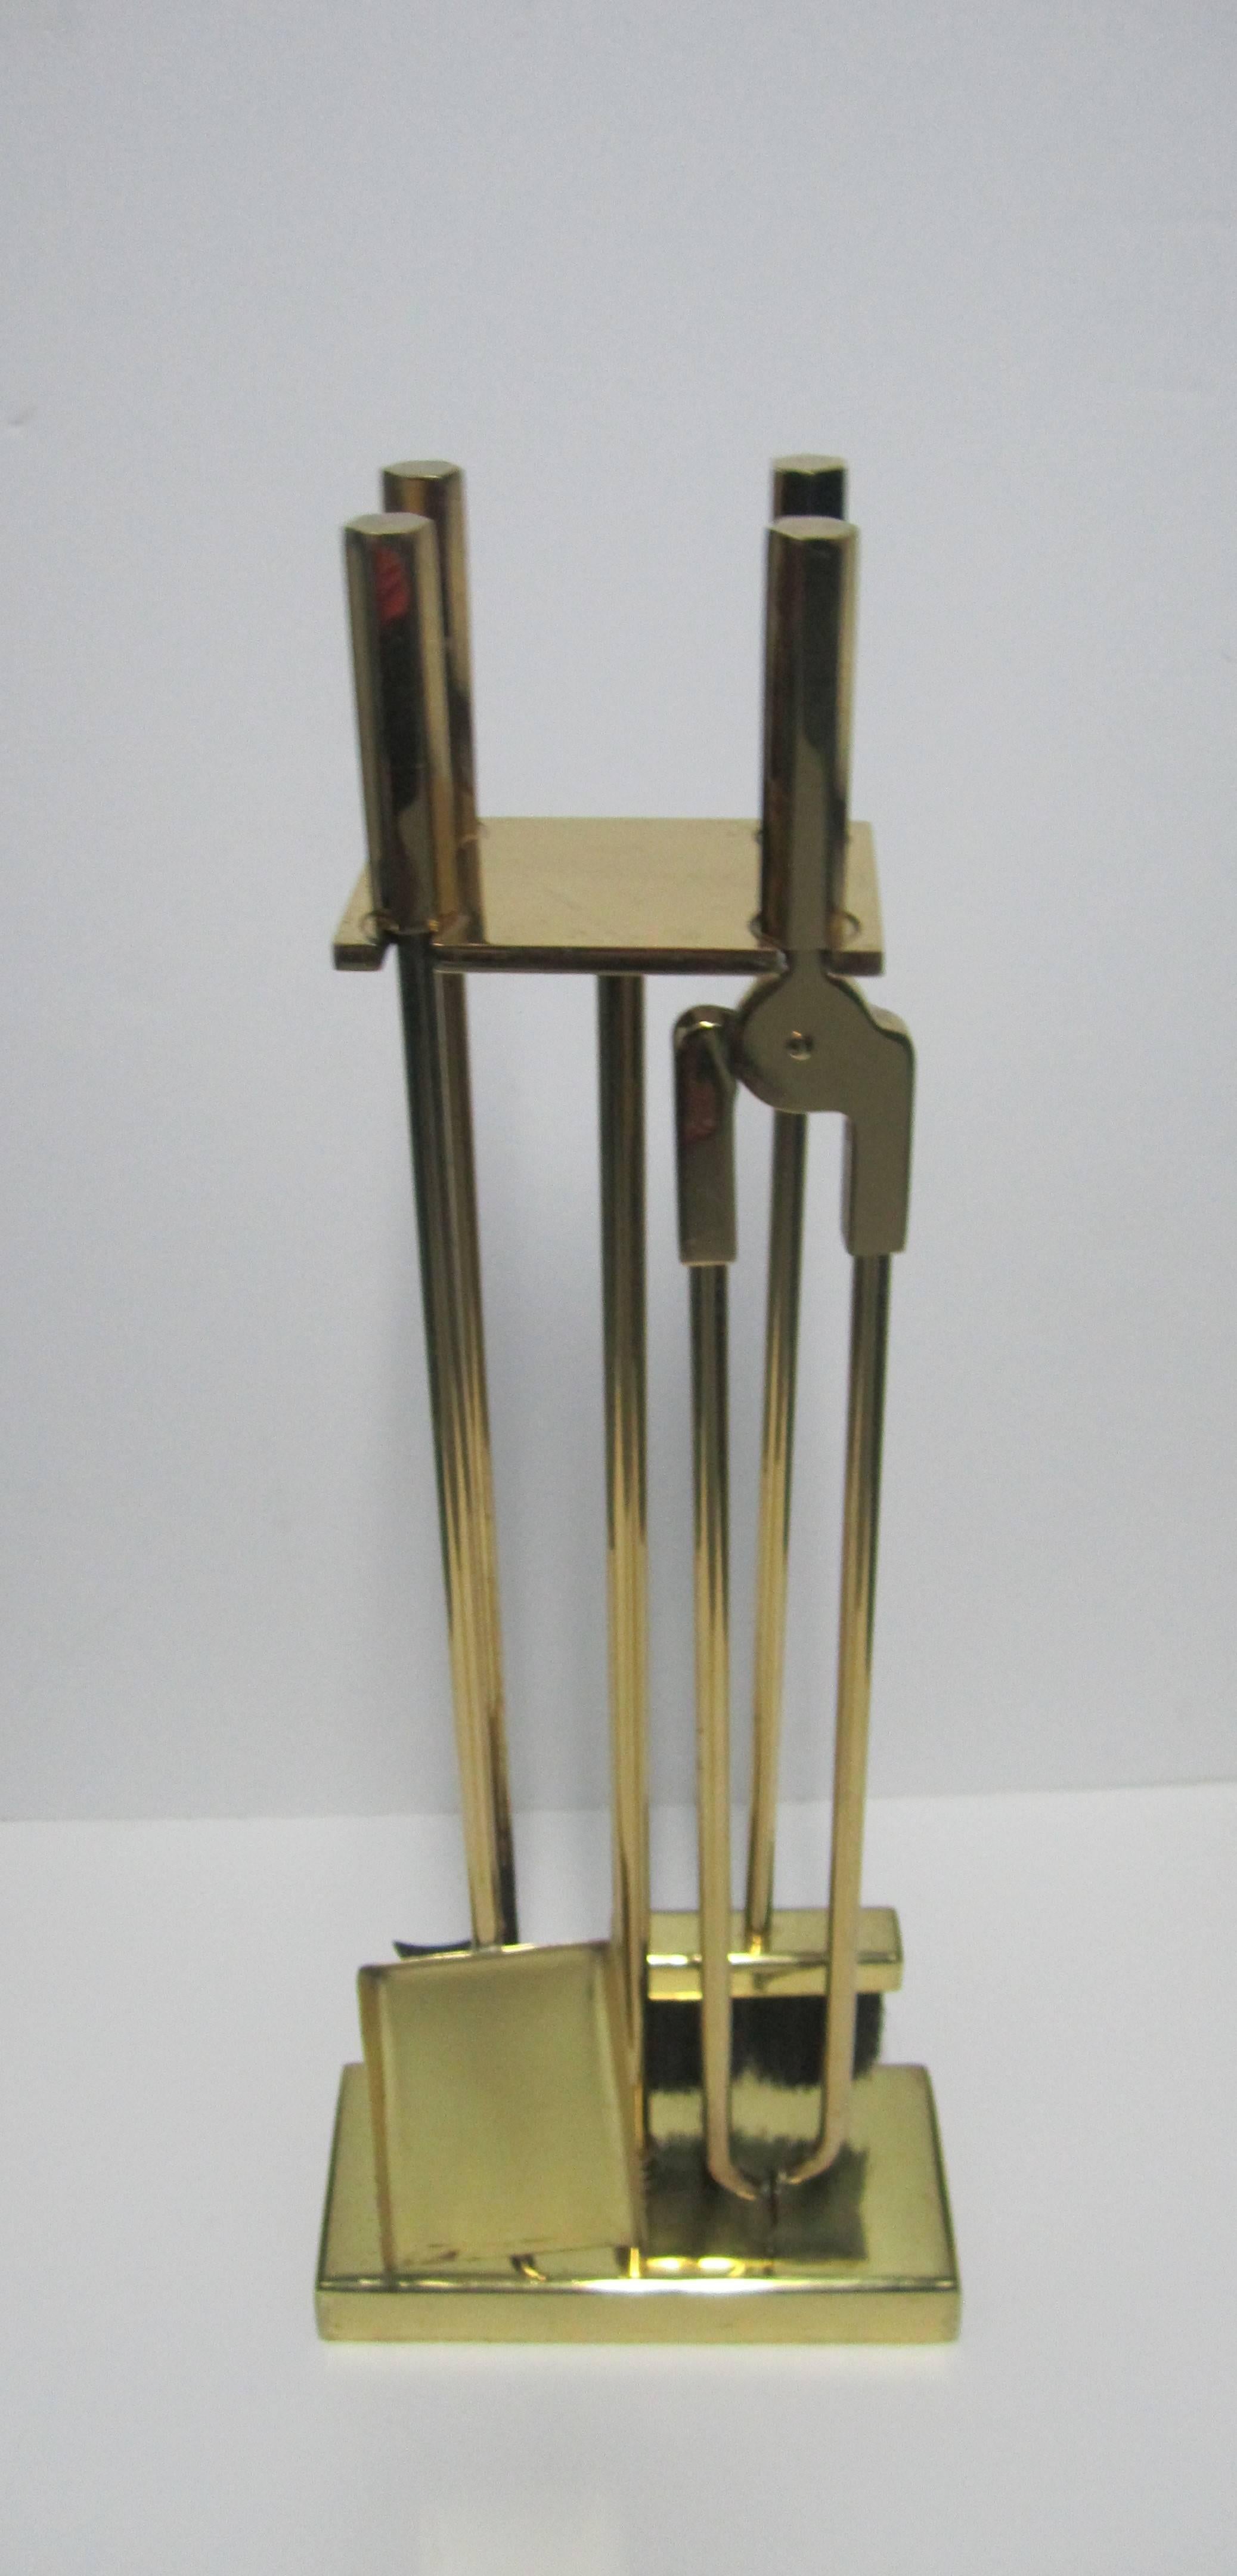 A substantial Modern style brass fireplace tool set. Set includes four tools with 'hexagon' shape handles held floating by rectangular base frame. Tools sit square with two in front and two in back. 

